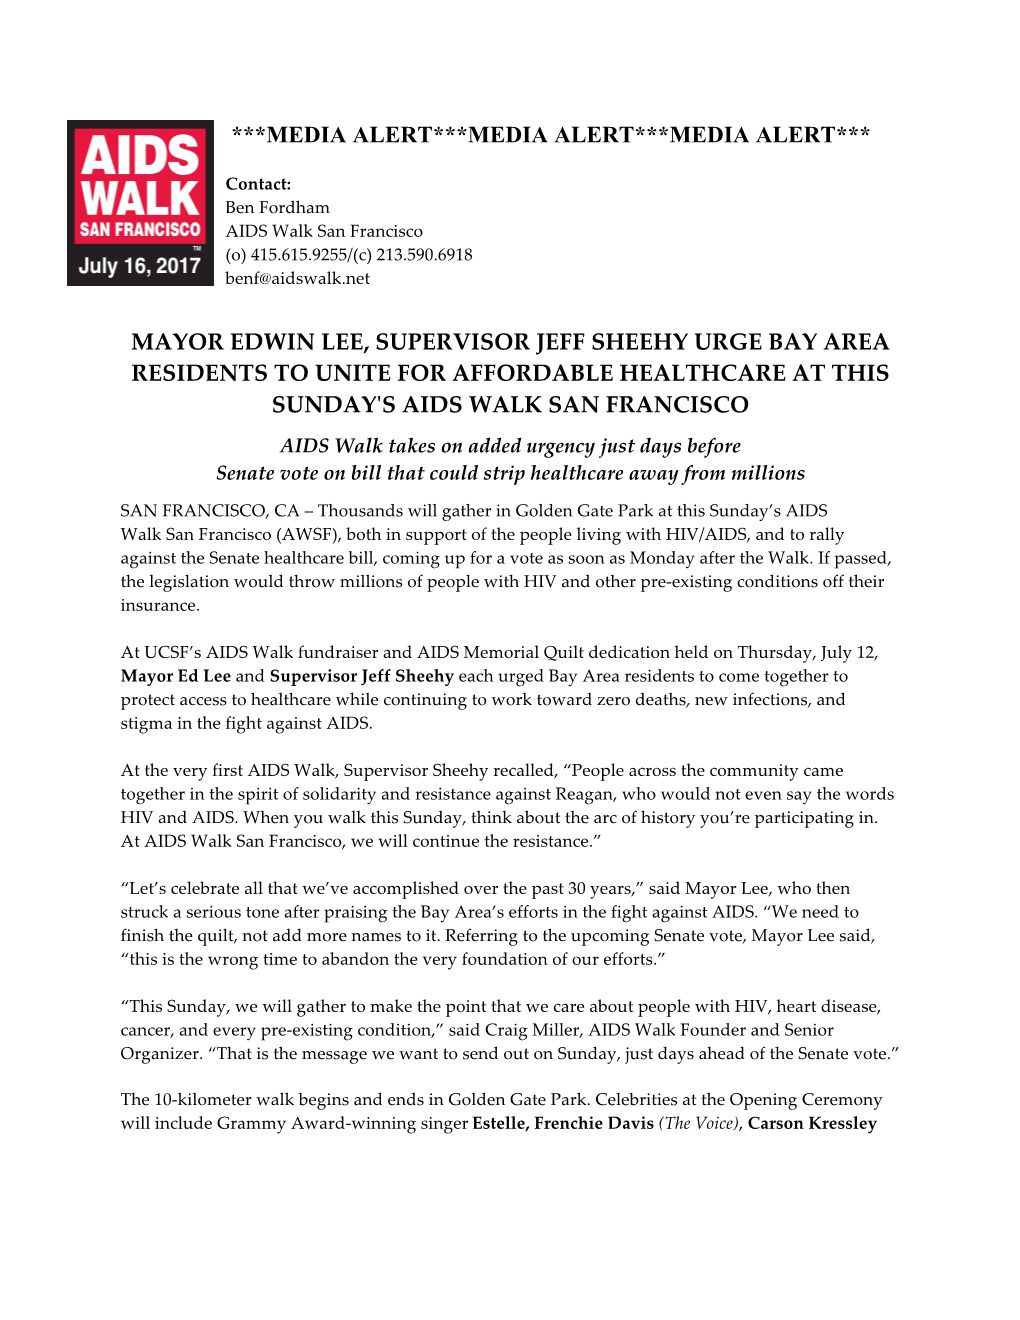 Mayor Edwin Lee, Supervisor Jeff Sheehy Urge Bay Area Residents to Unite for Affordable Healthcare at This Sunday's Aids Walk San Francisco